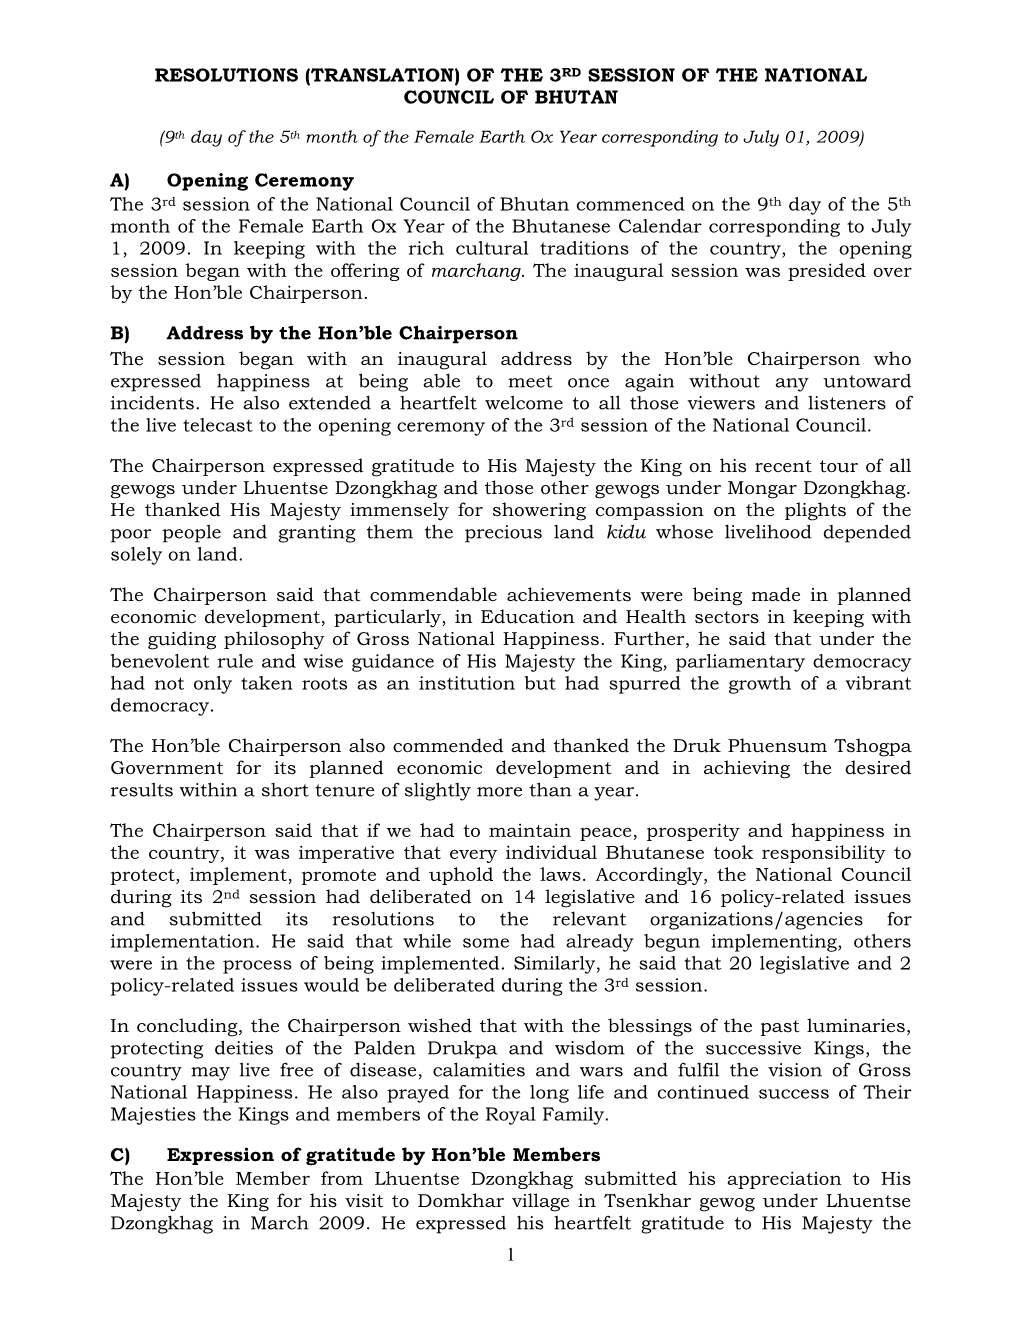 1 RESOLUTIONS (TRANSLATION) of the 3RD SESSION of the NATIONAL COUNCIL of BHUTAN A) Opening Ceremony the 3Rd Session of the Nati